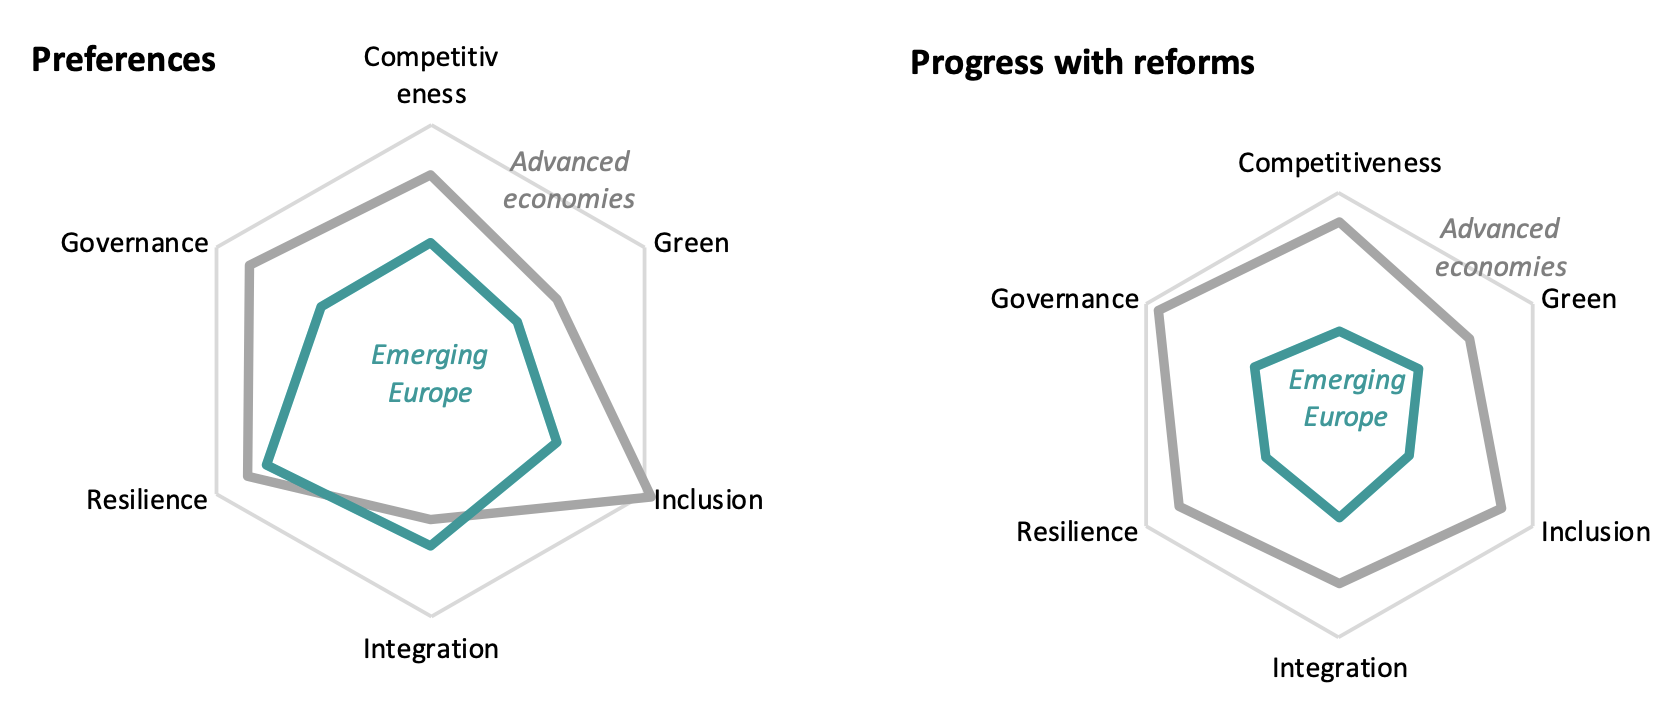 Figure 4 Differences in citizens’ preferences are large and aligned with progress with reforms